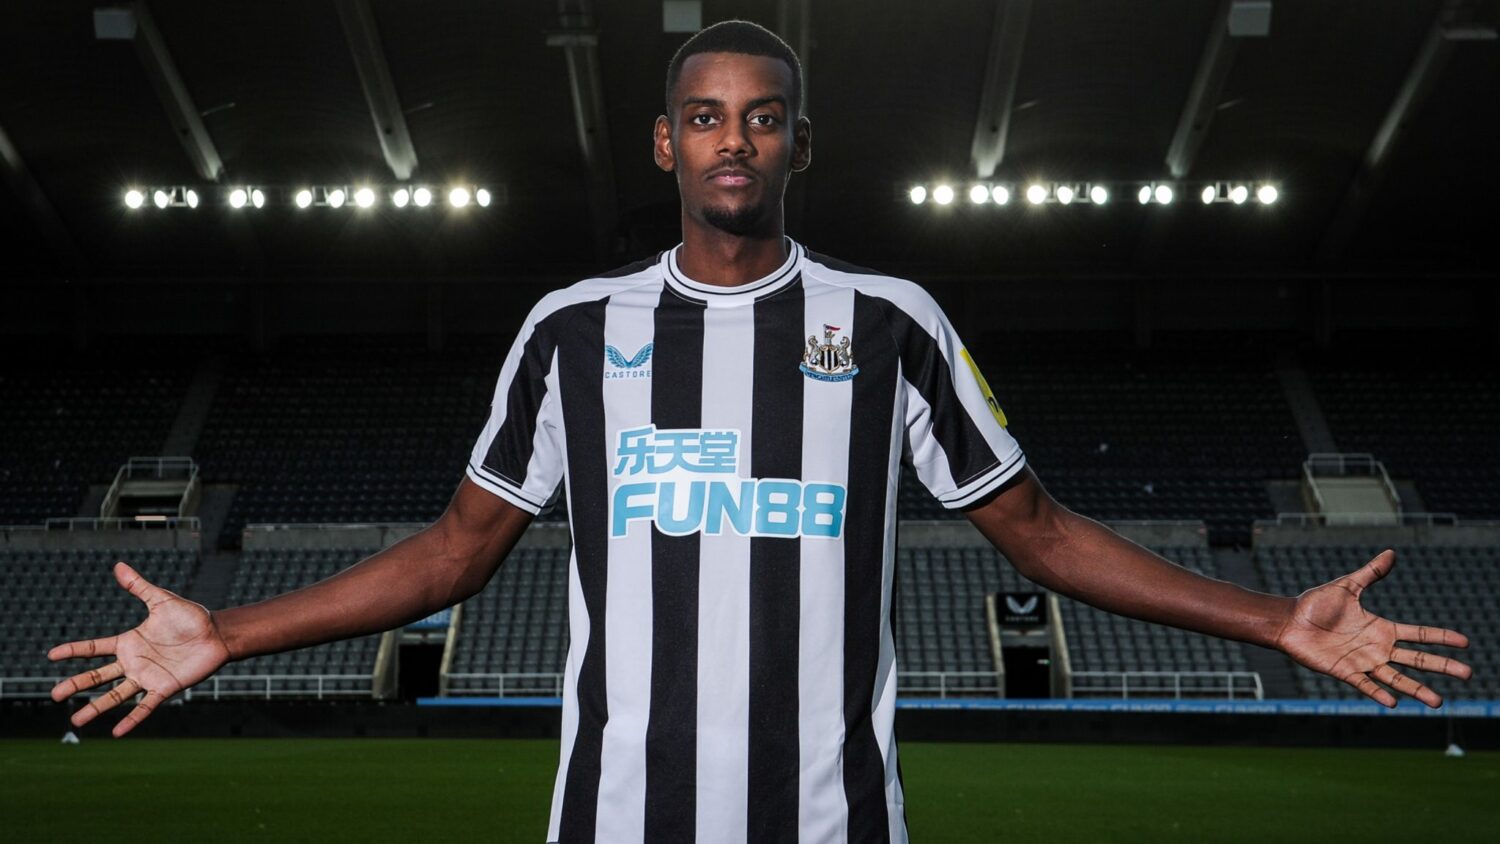 Newcastle’s Alexander Isak Likely To Be Out Until After World Cup With Thigh Injury